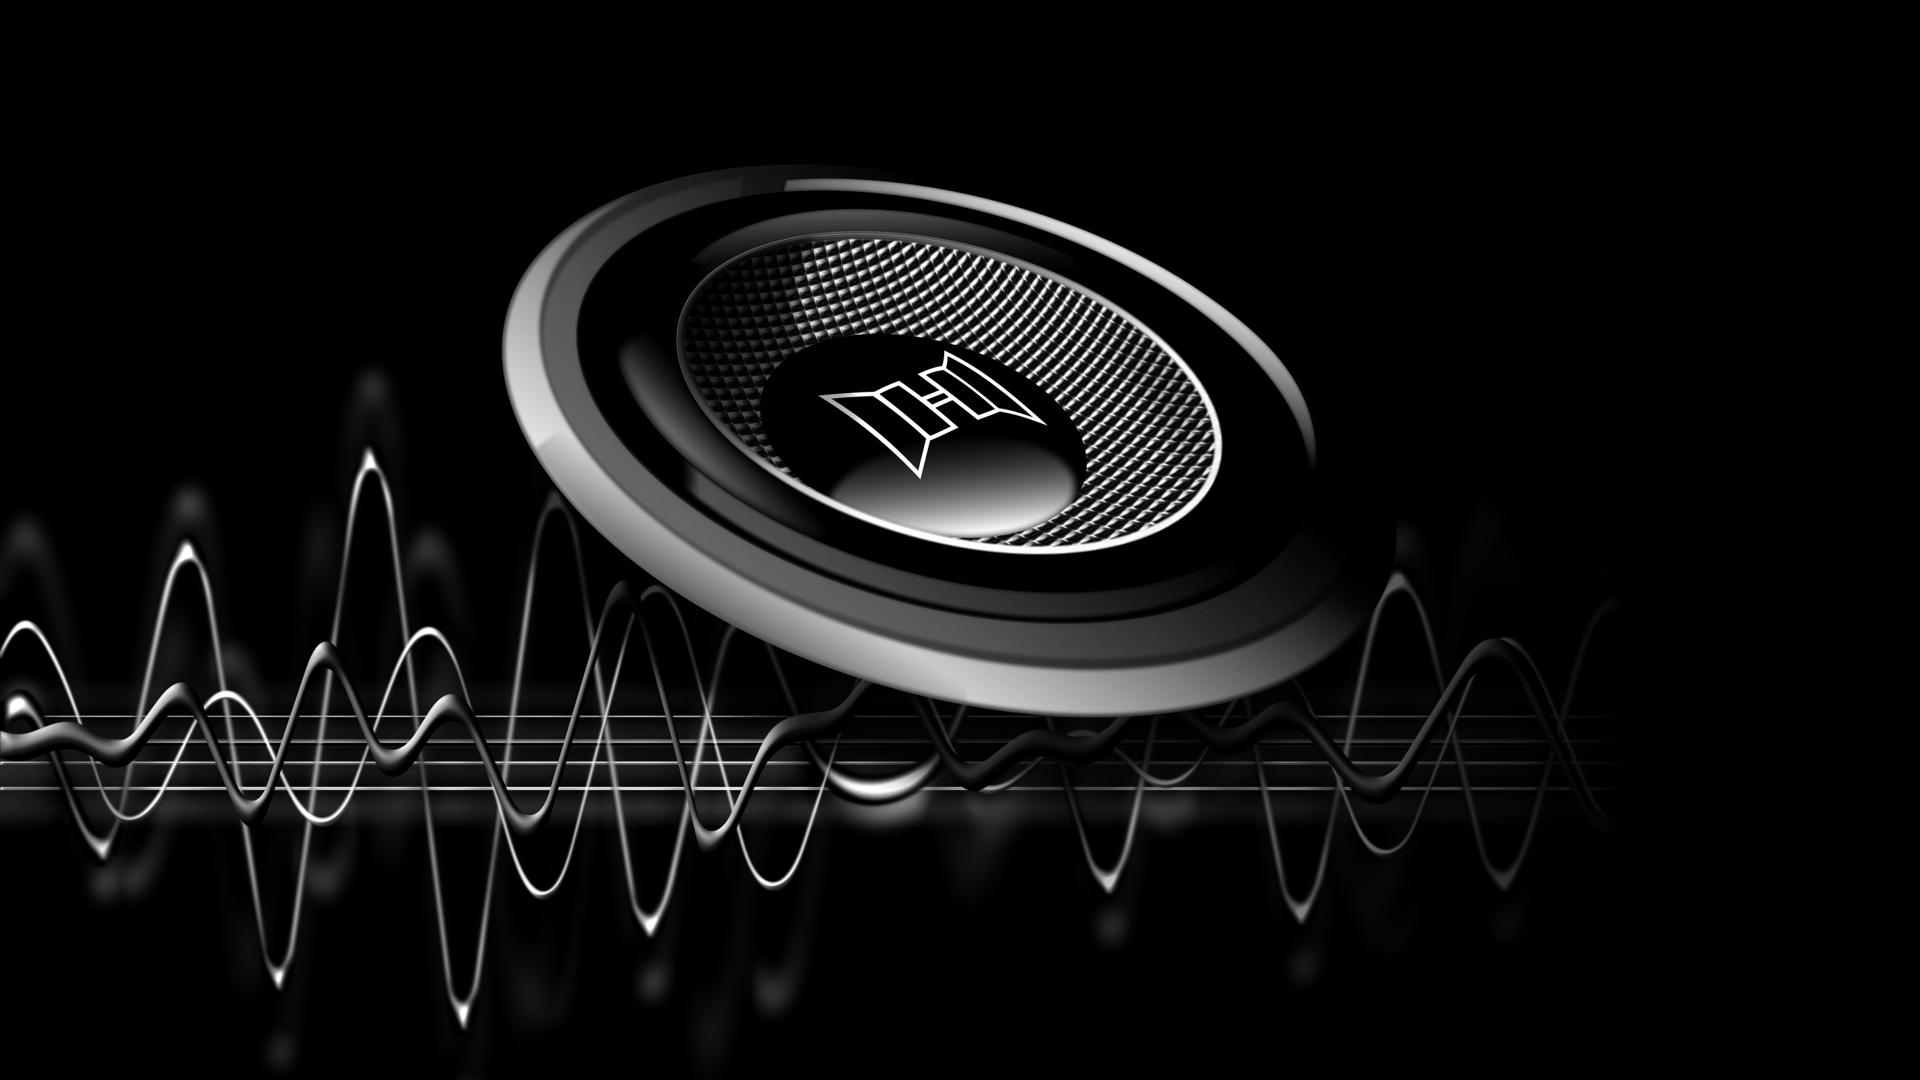 3d, And, Cg, Abstract, Black, Speaker, Music Wallpaper